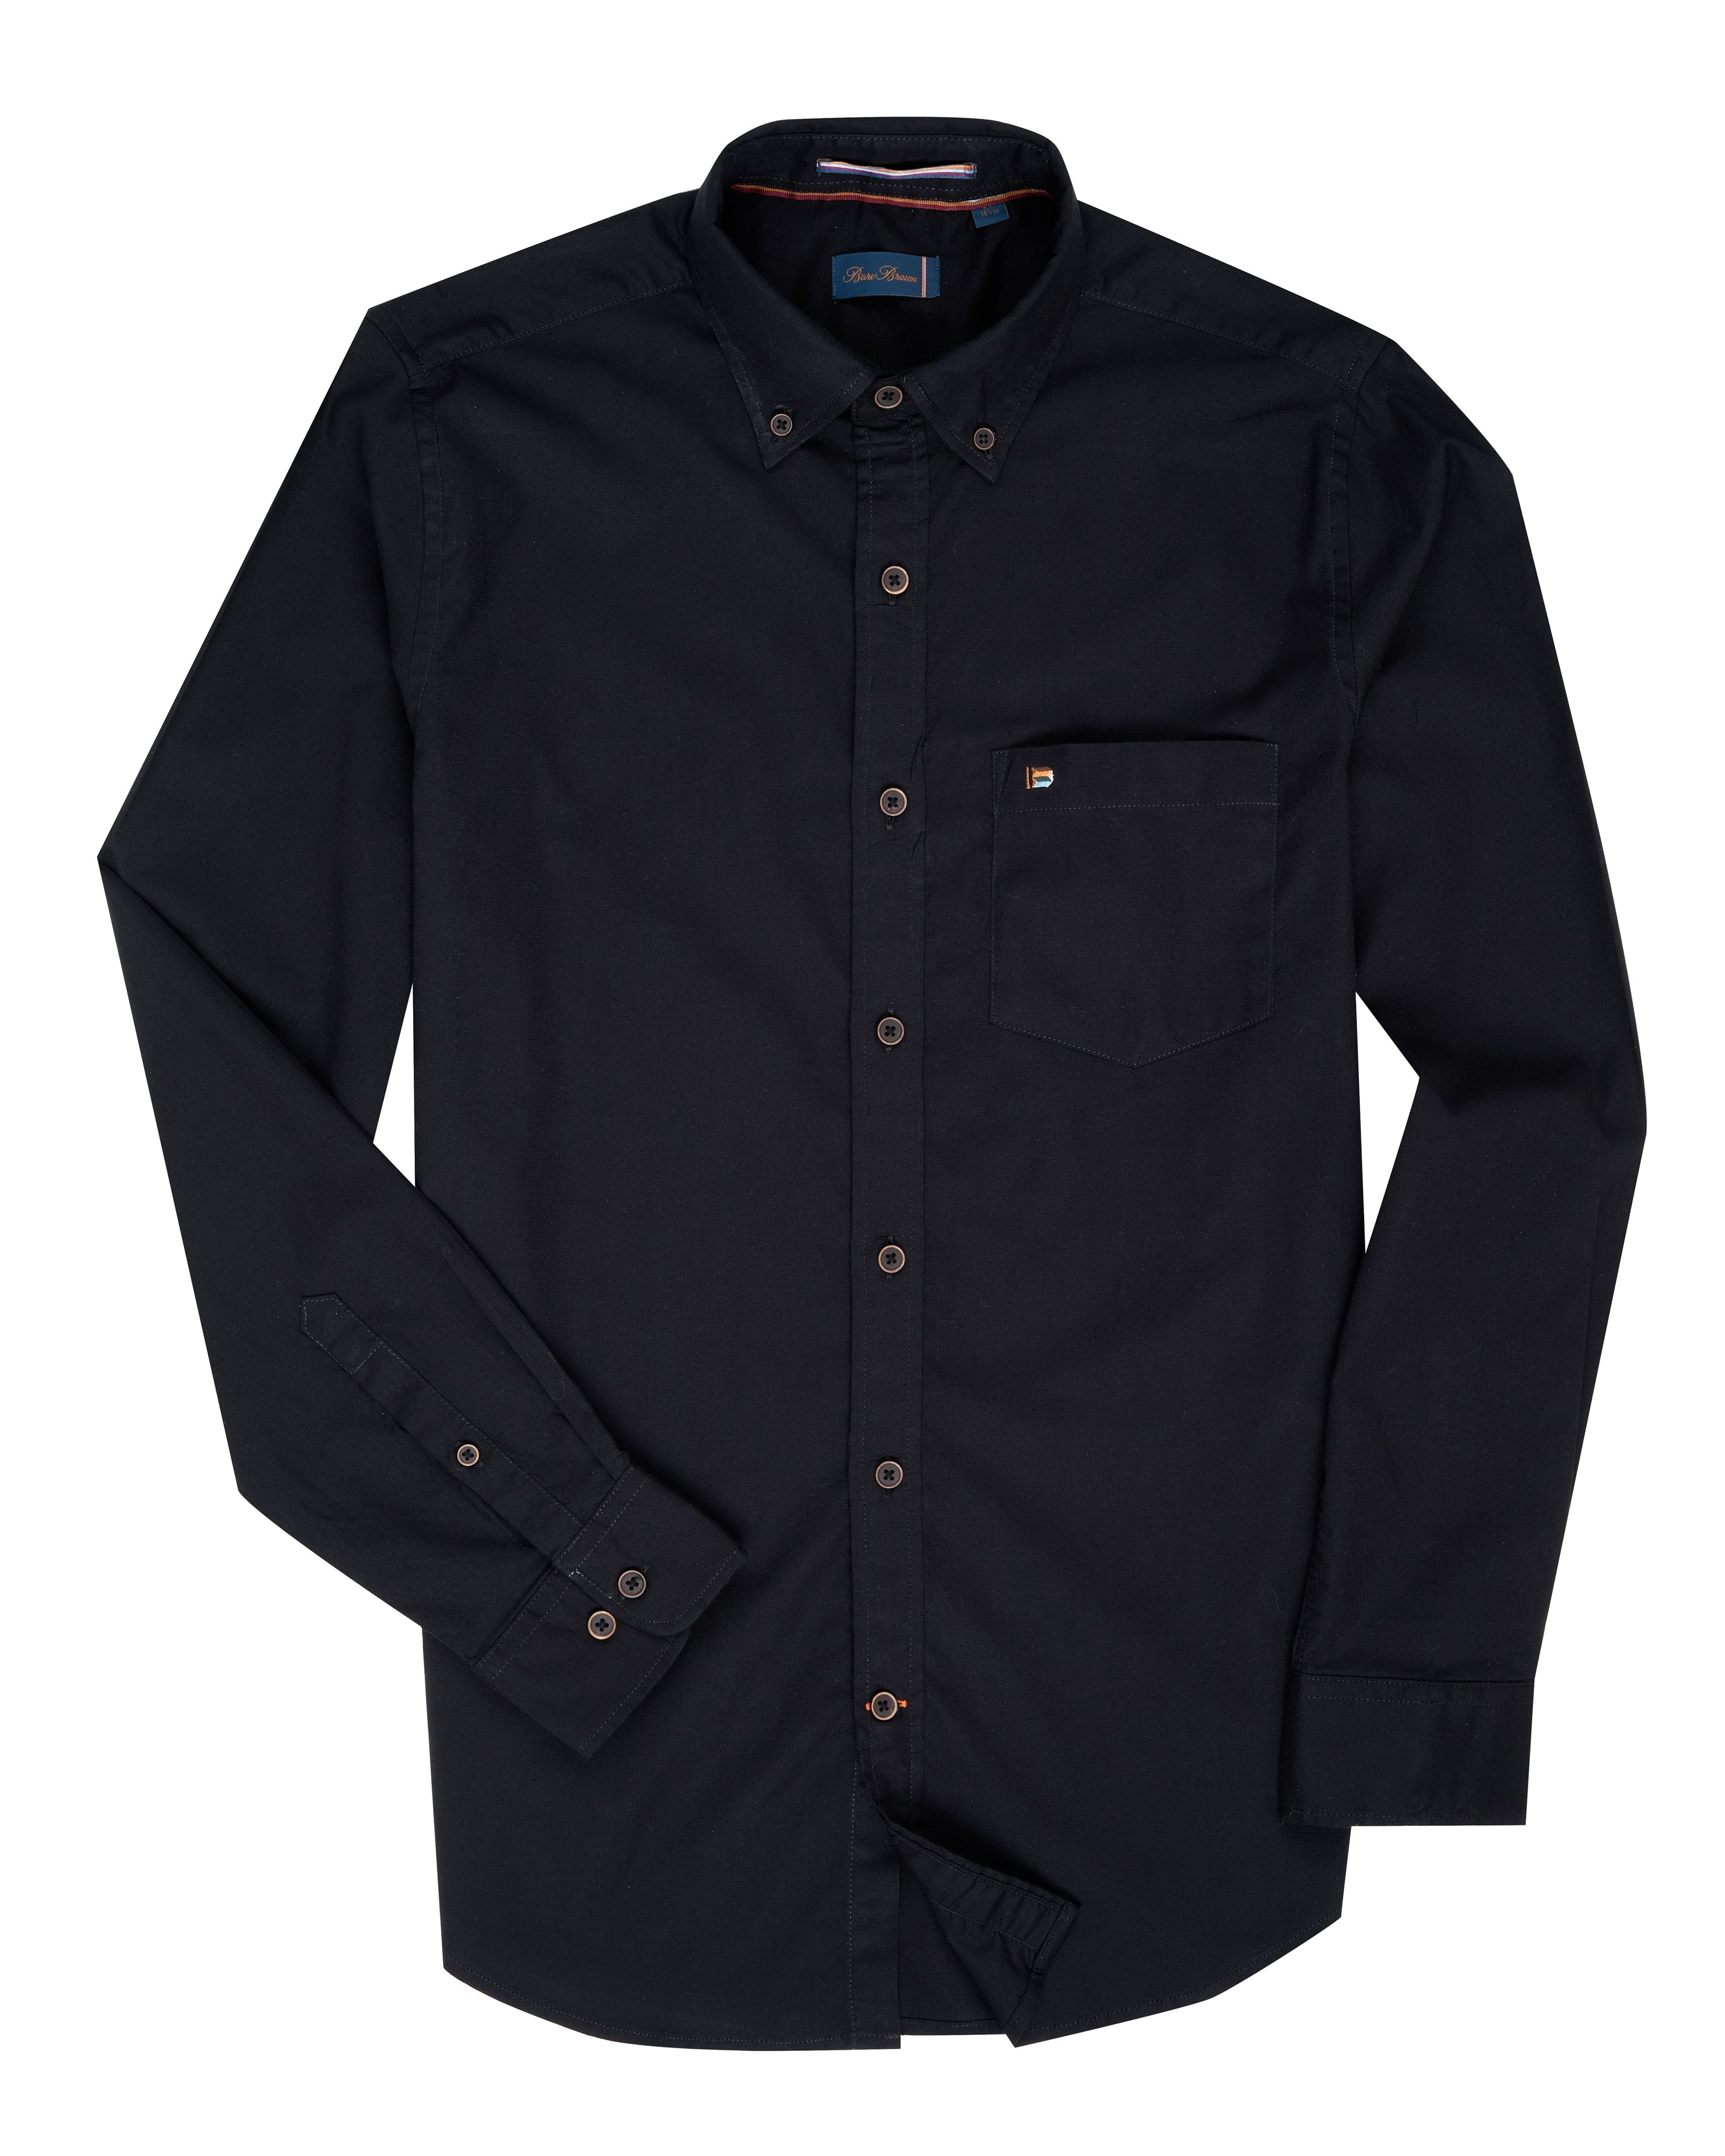 Bare Brown Cotton Stretch Shirt, Slim Fit with Full Sleeves - Black